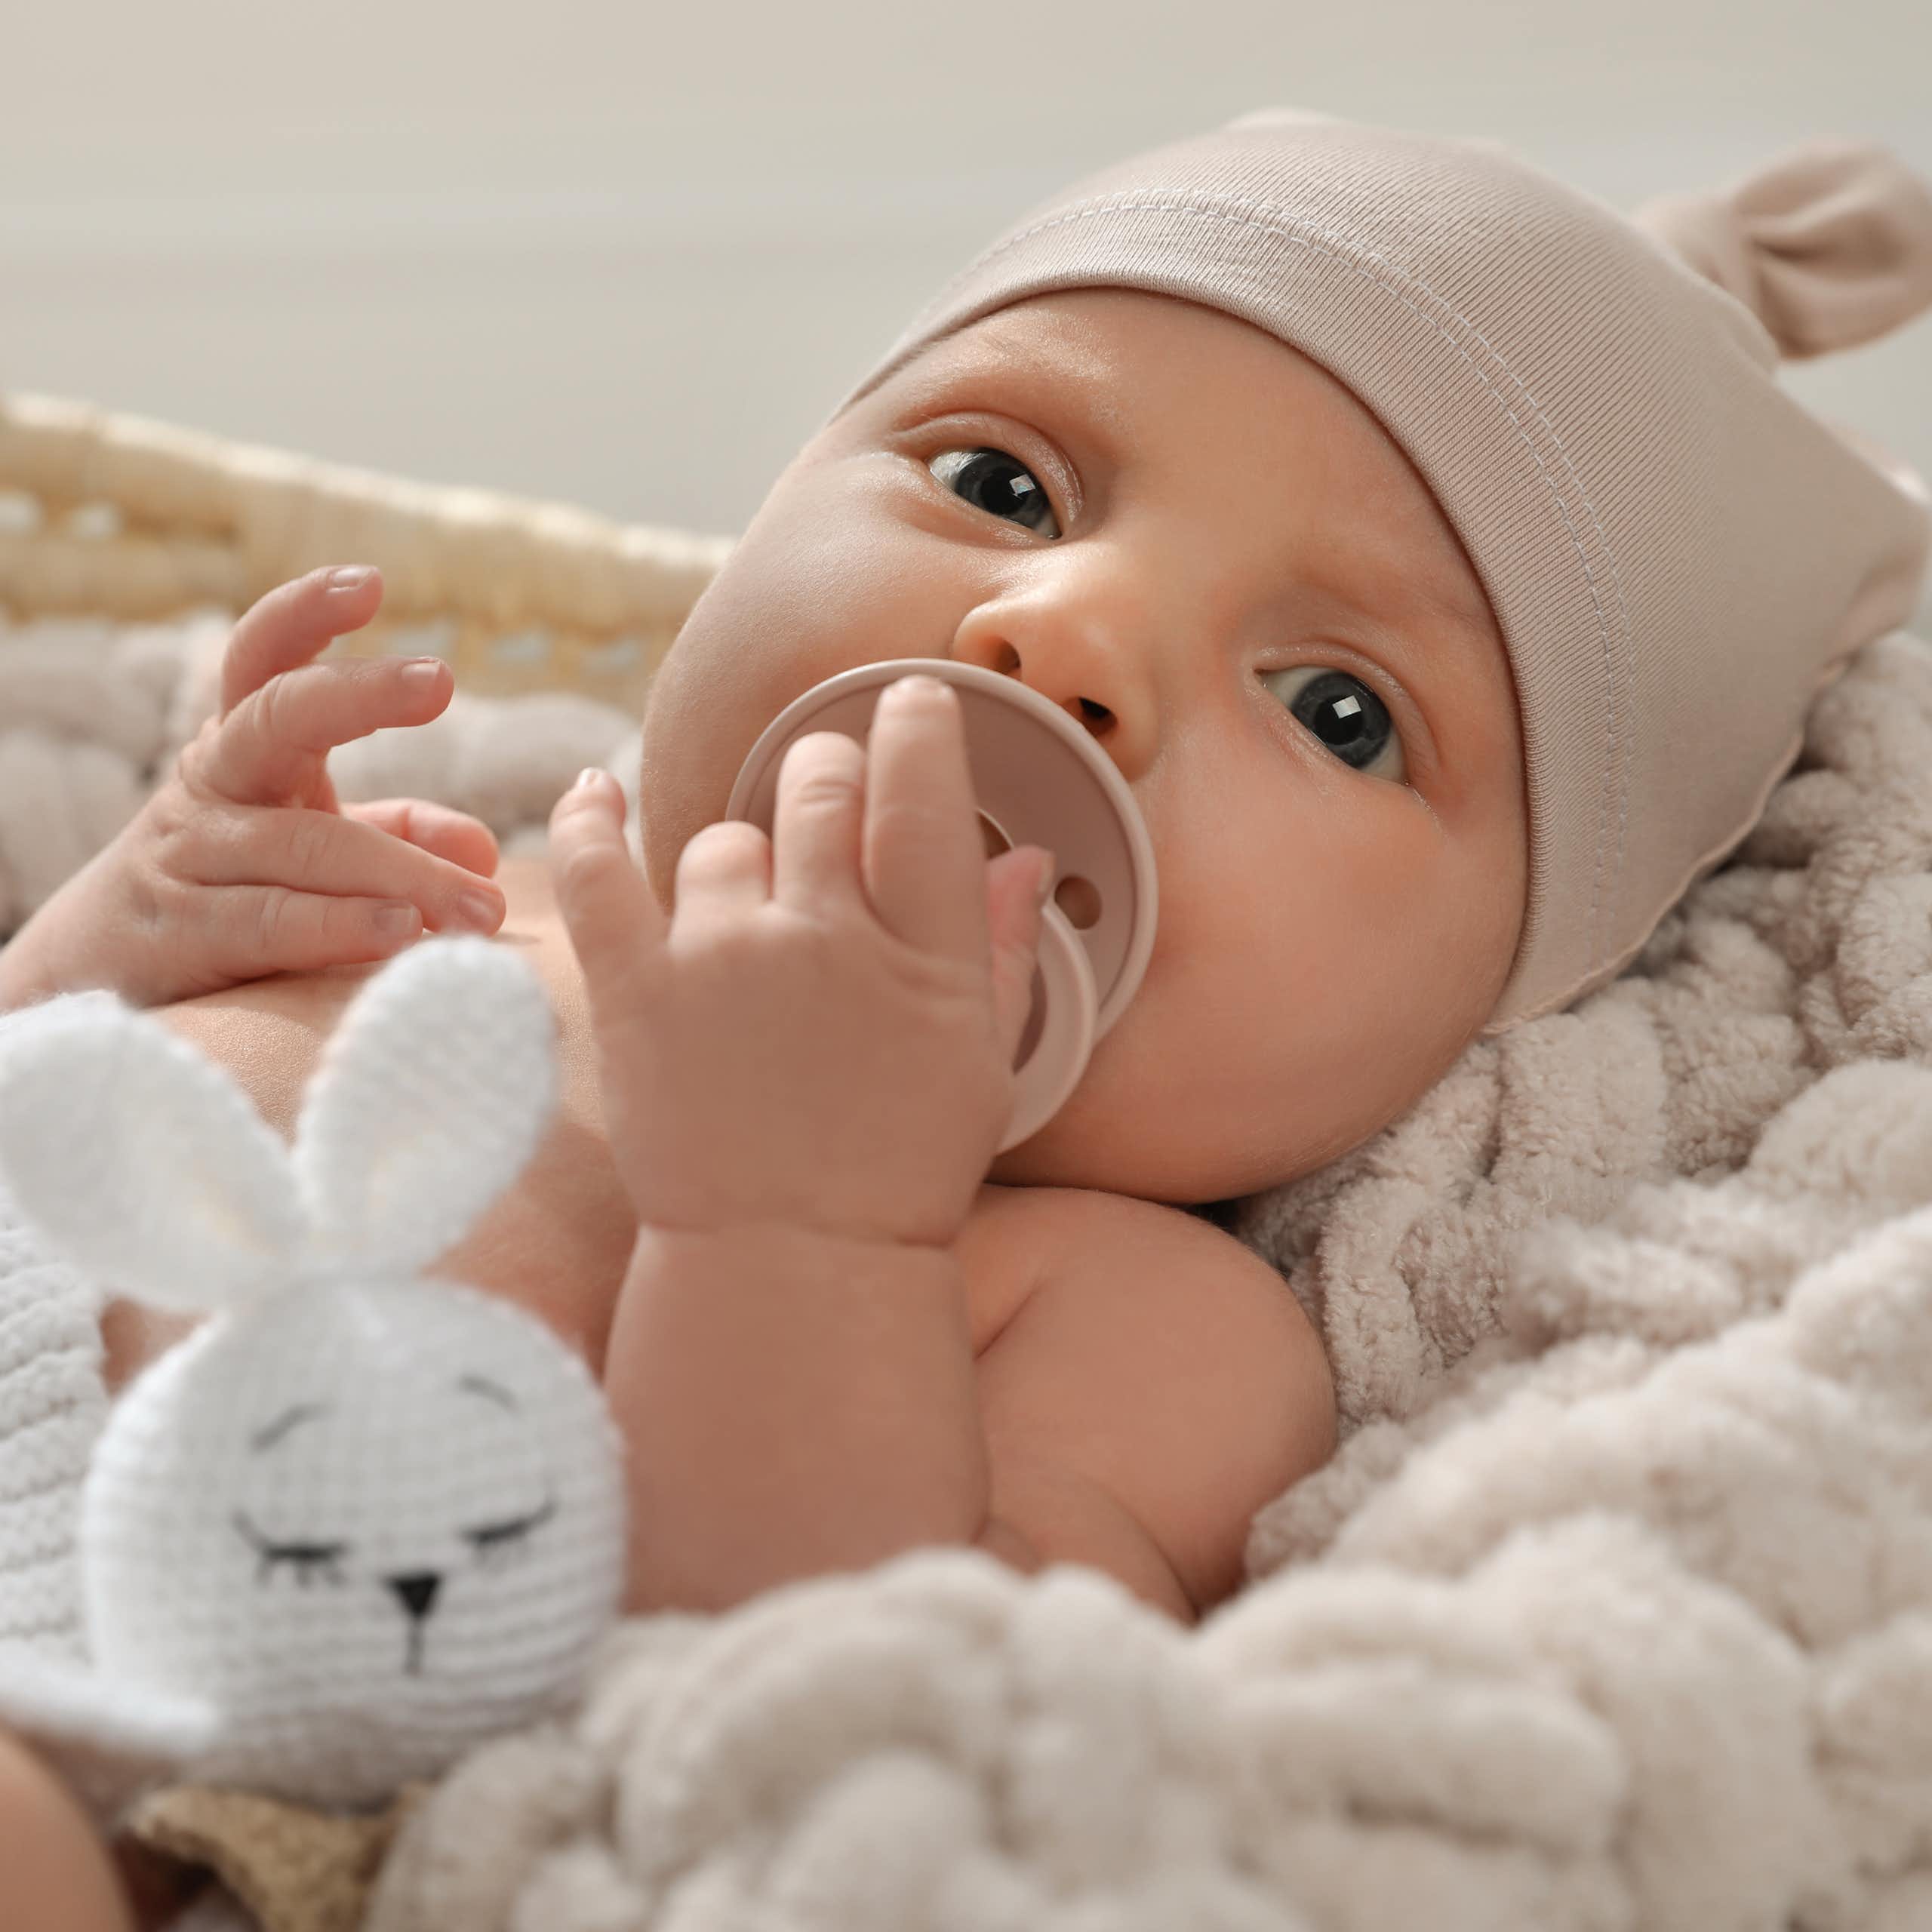 A blue-eyed infant wearing a beige cap and holding a pacifier looks at the camera.